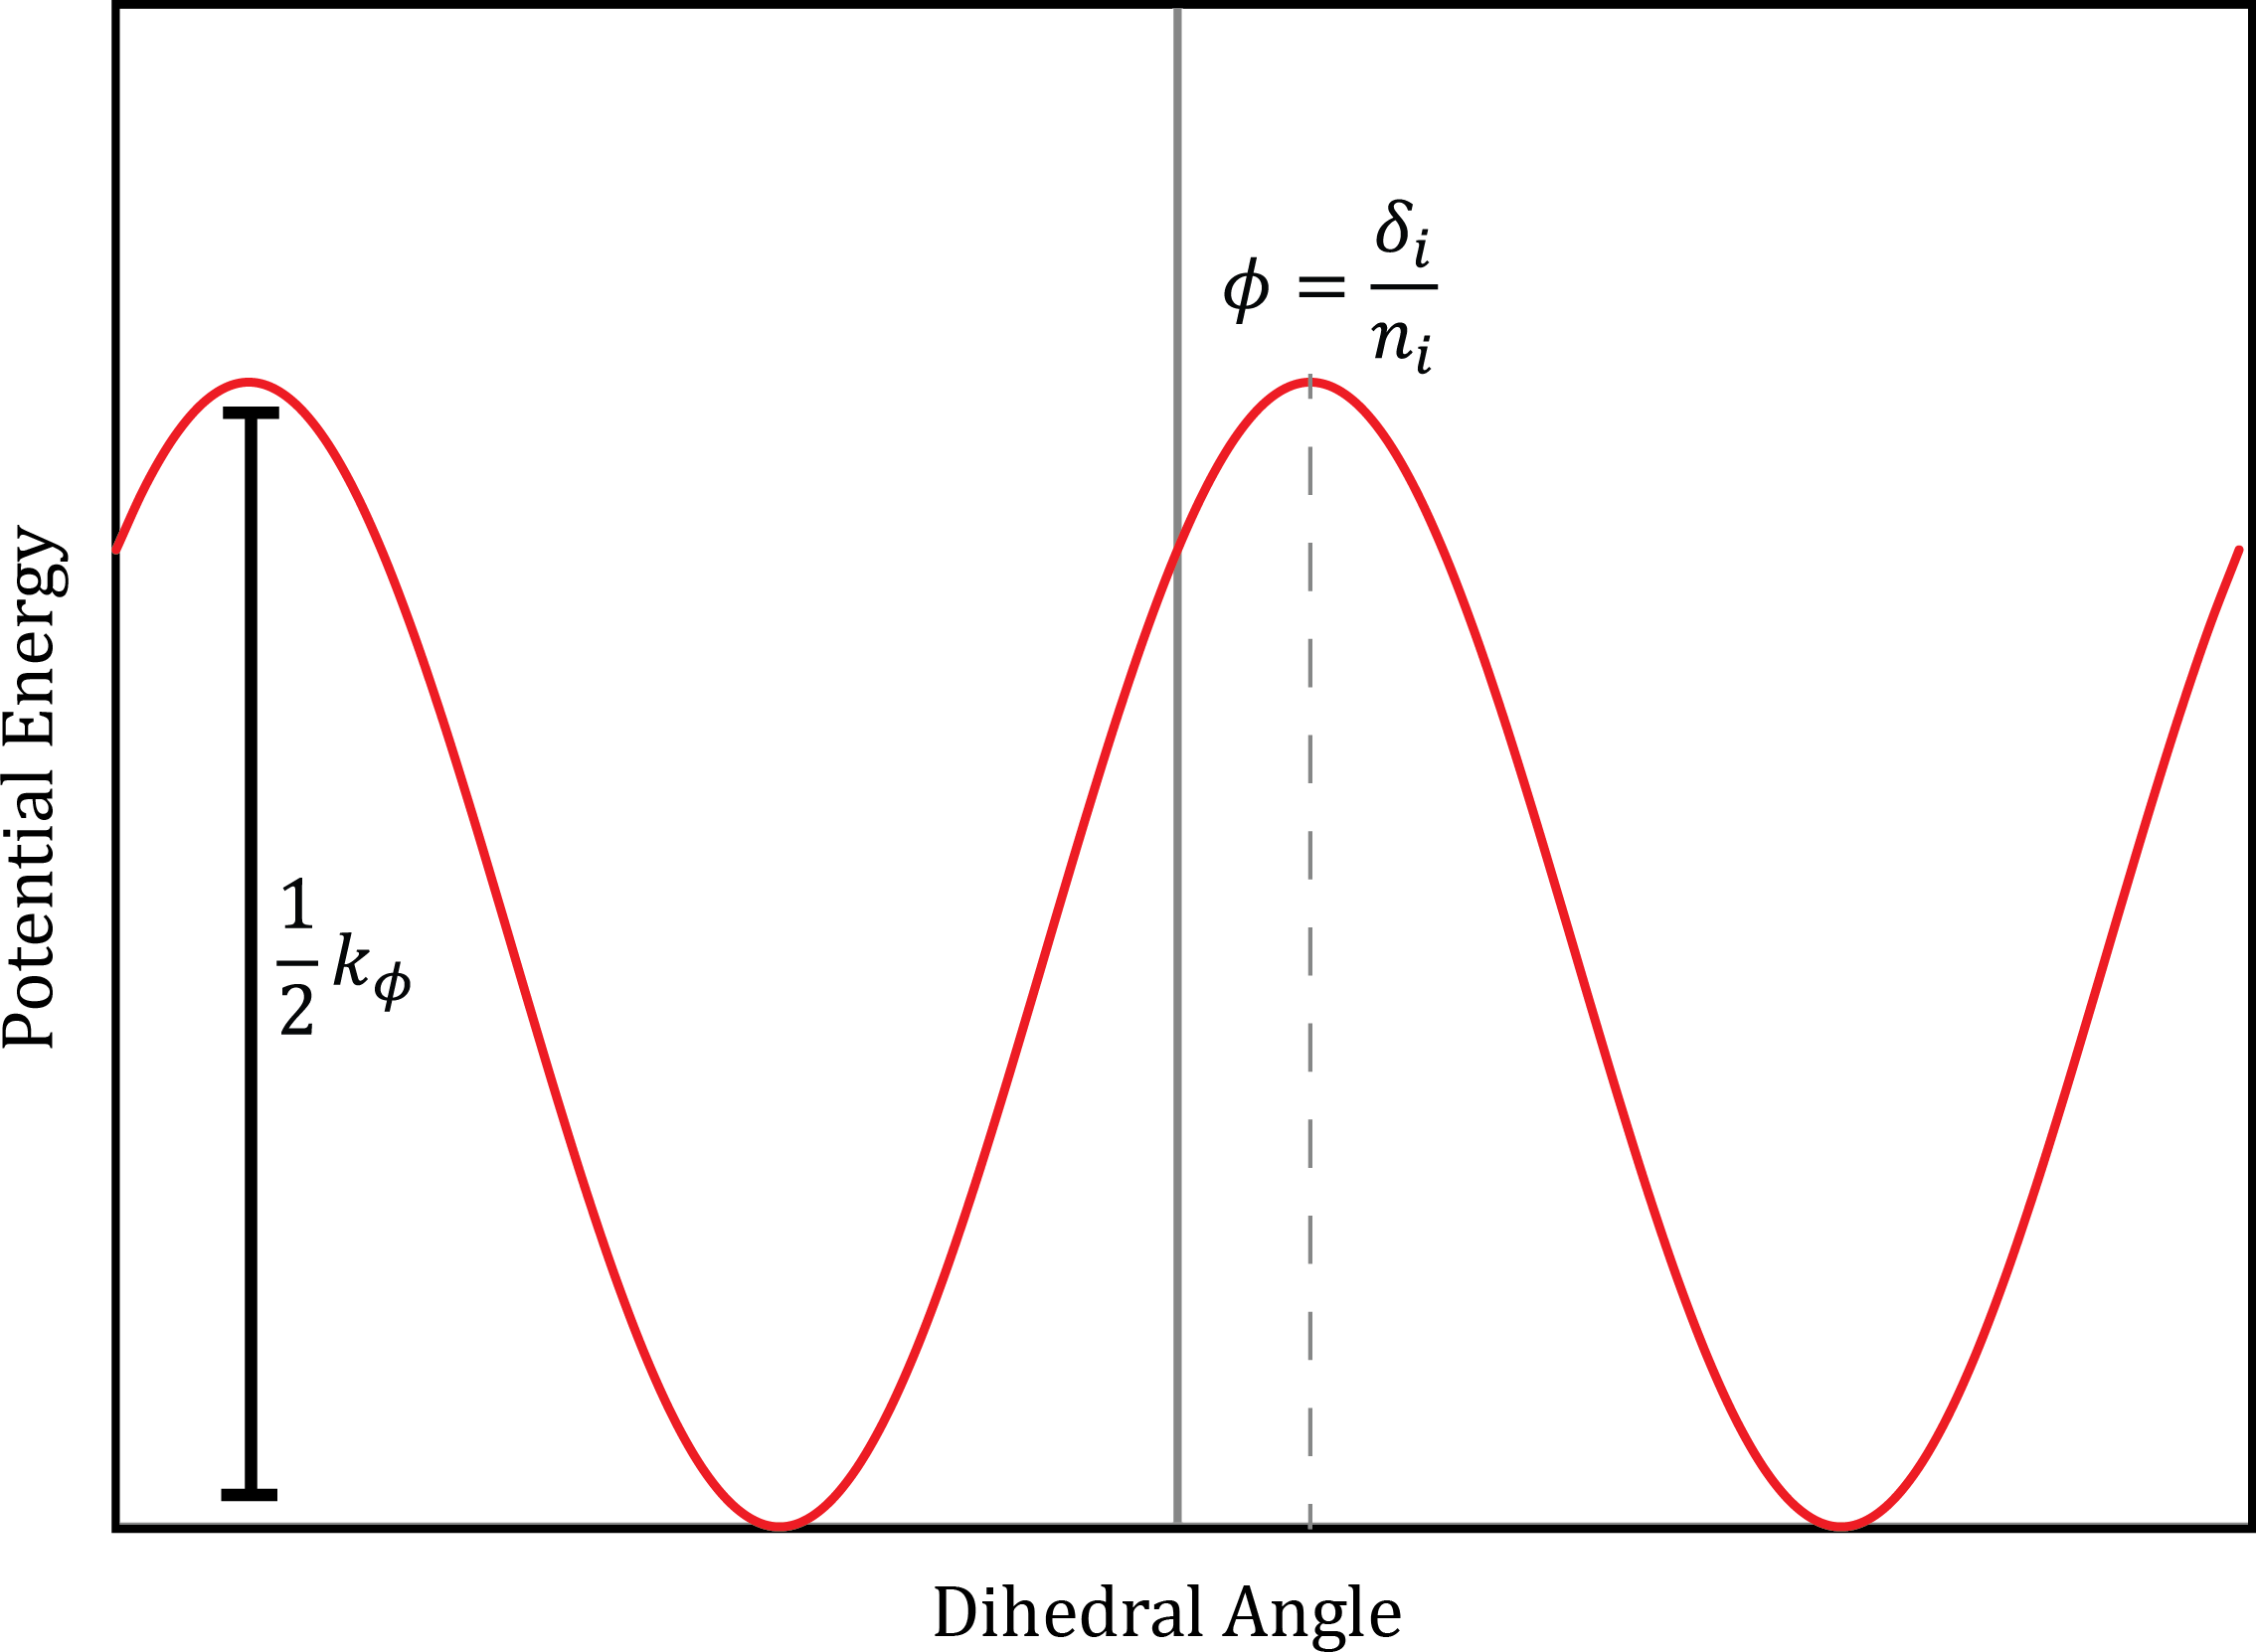 ../_images/Dihedral_angle_potential_schematic.png